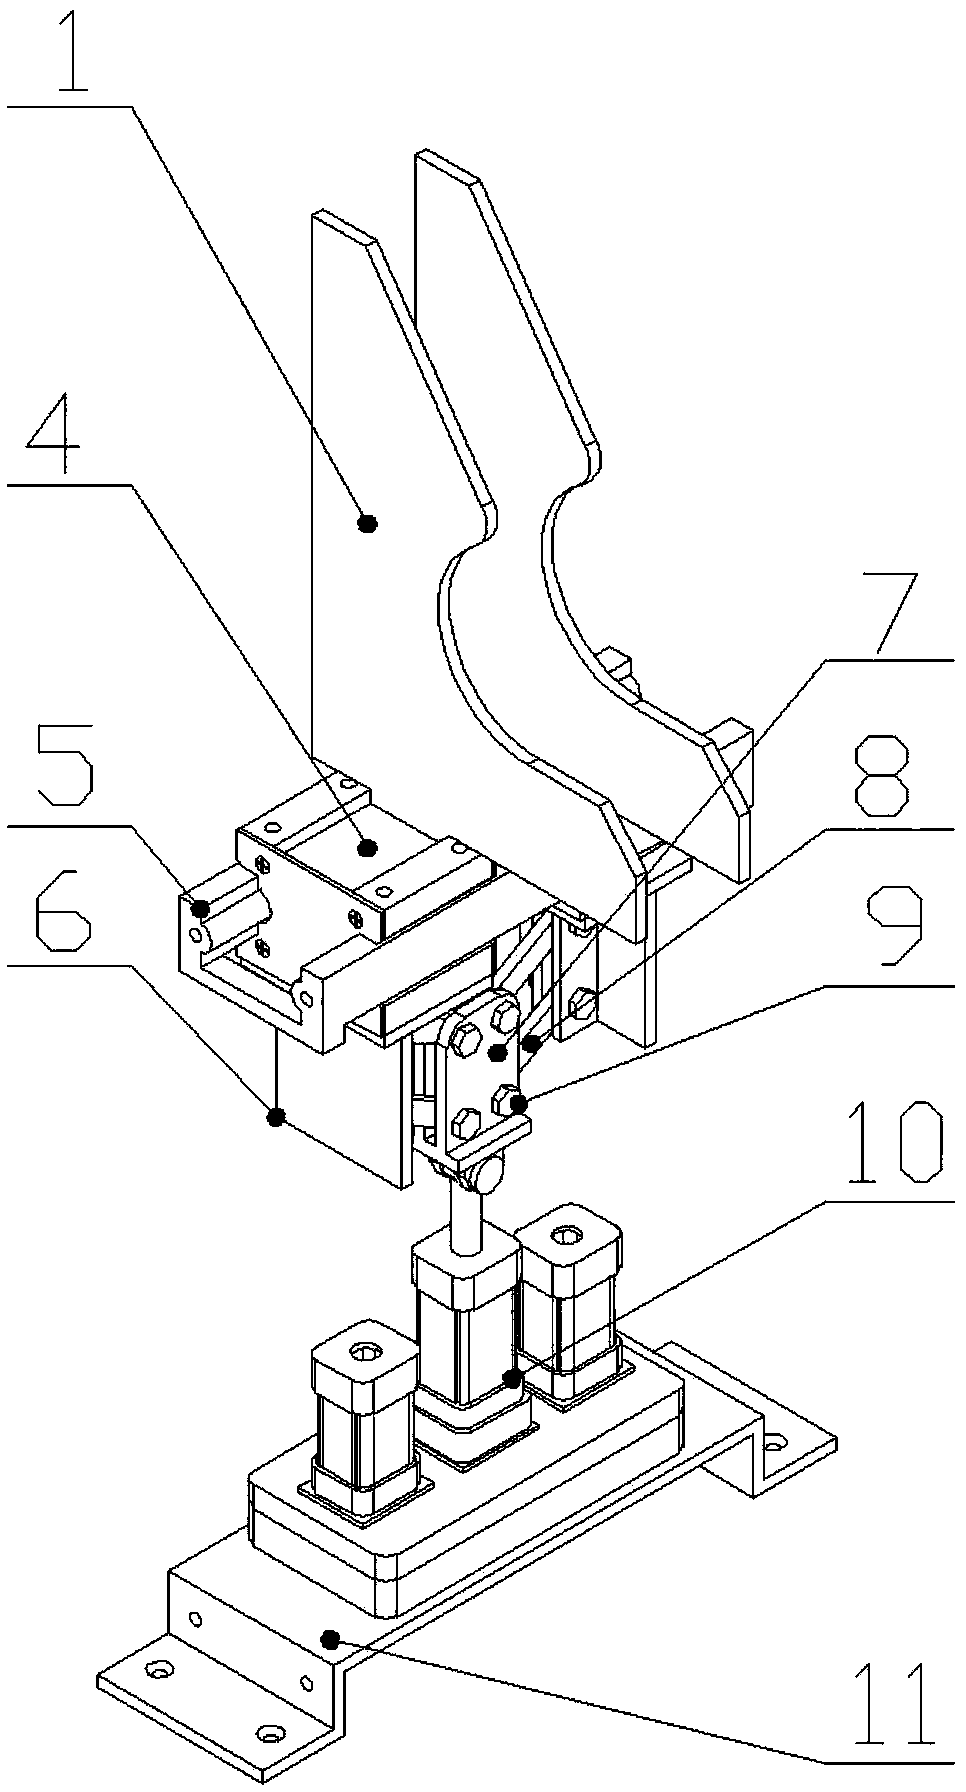 Parallel clamping manipulator device